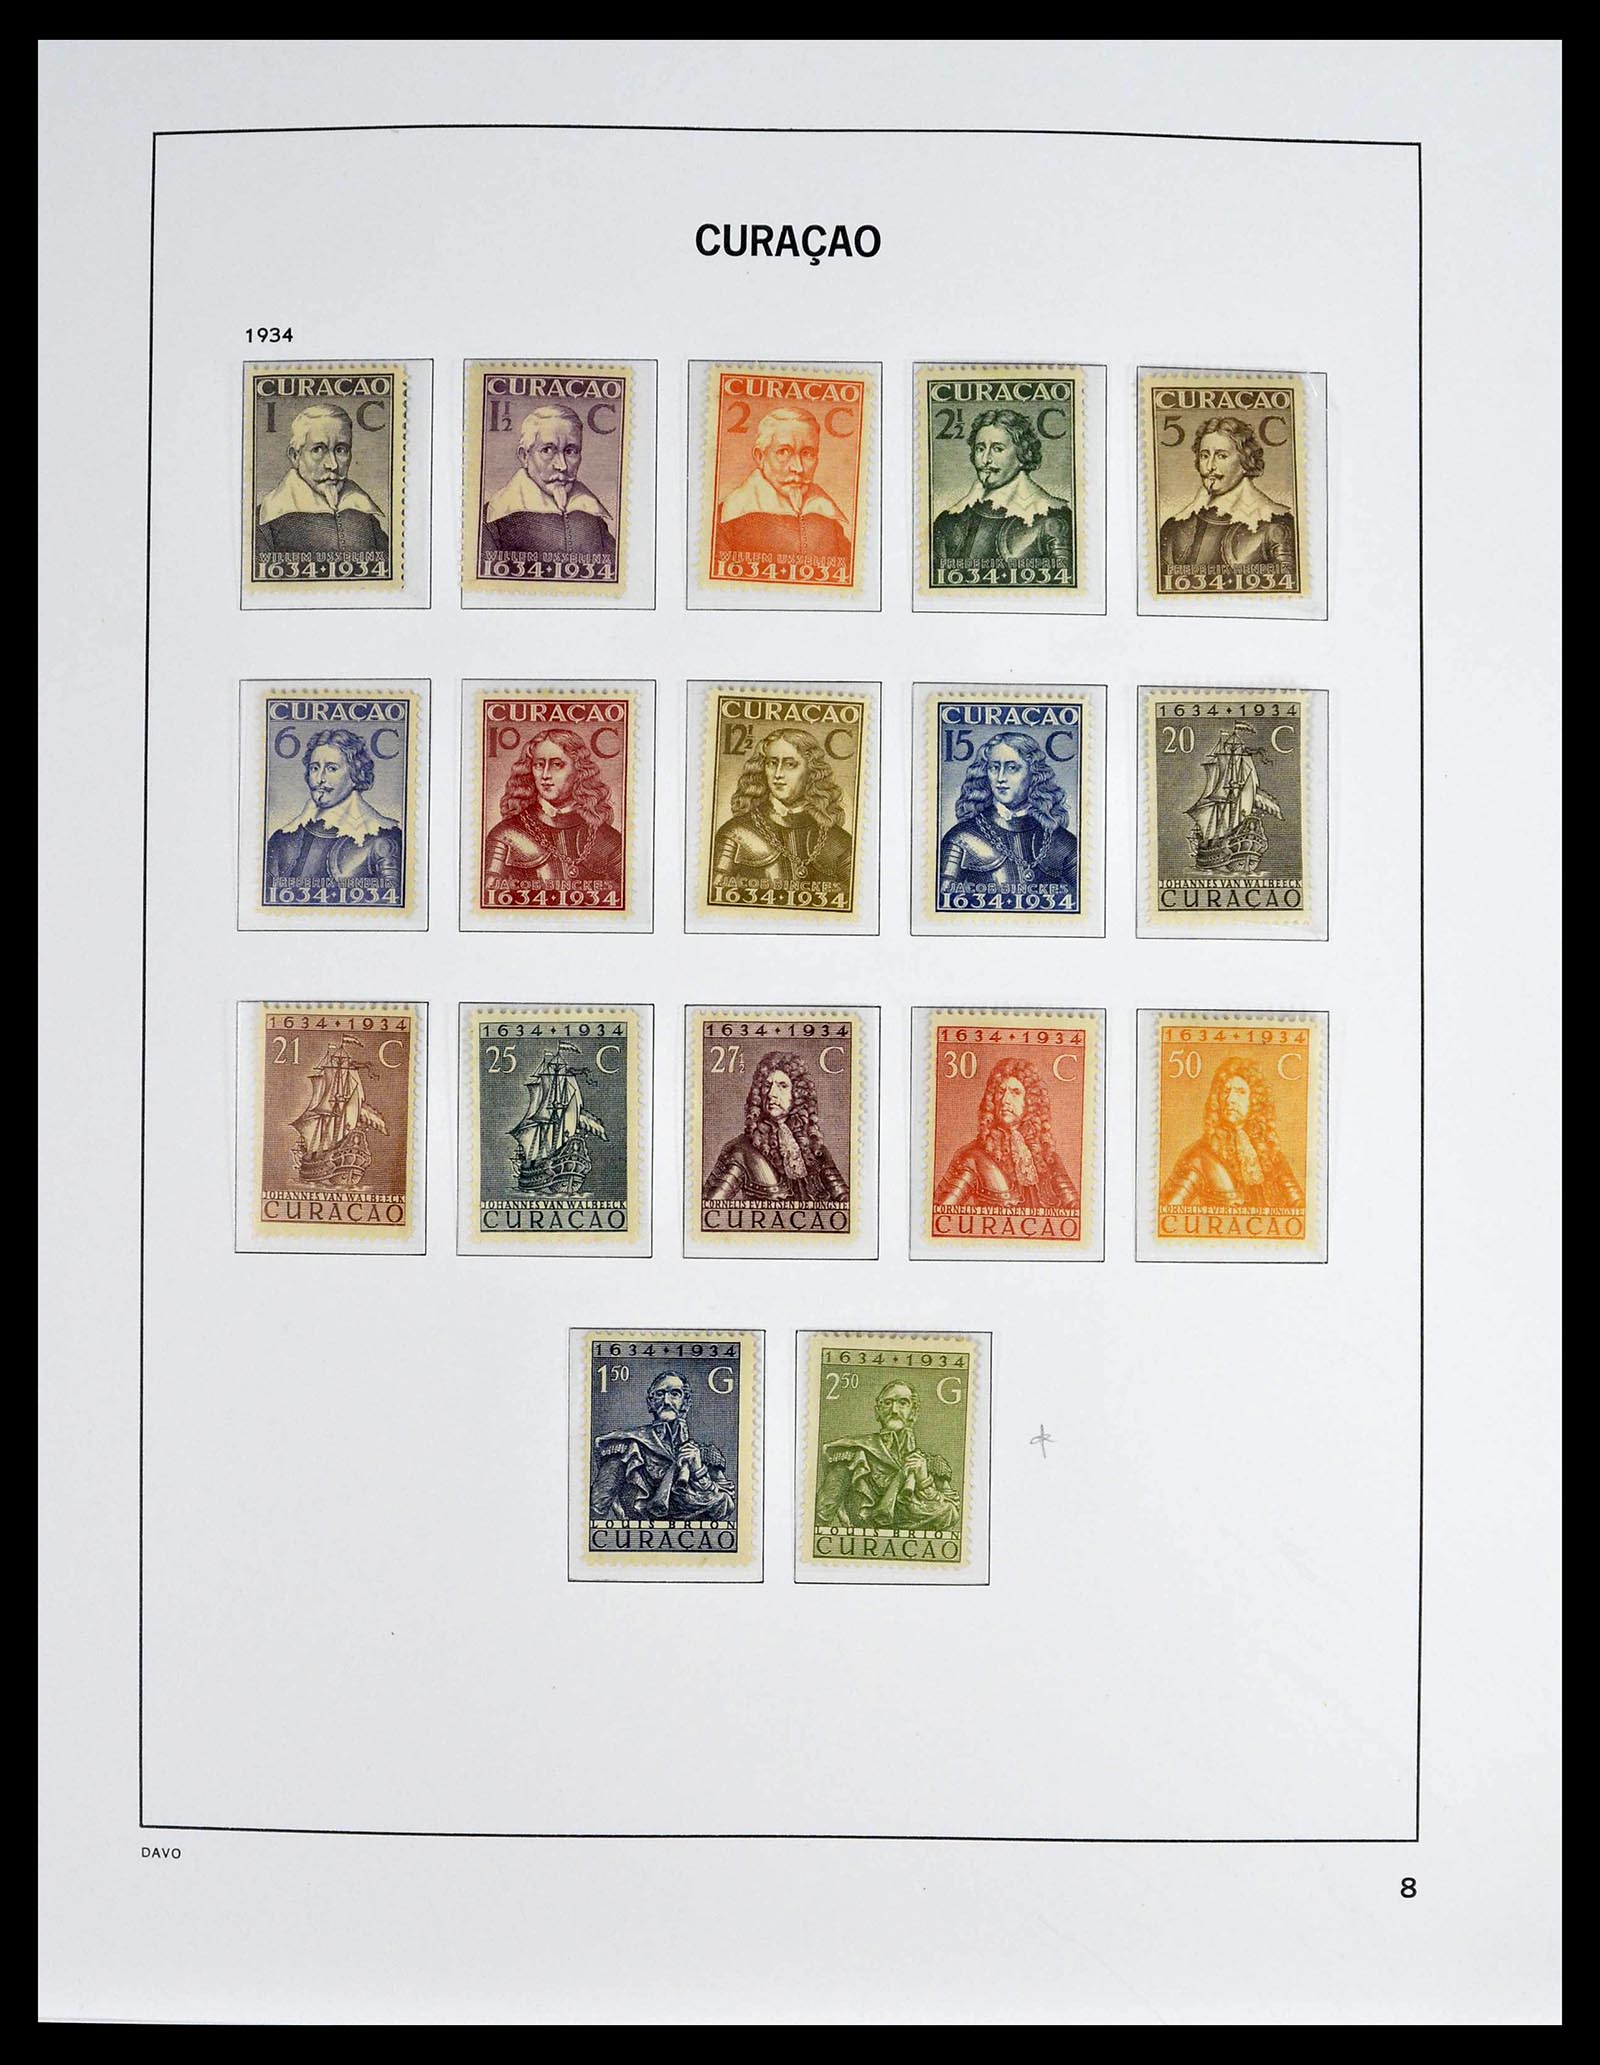 39360 0008 - Stamp collection 39360 Curaçao/Antilles complete 1873-2013.